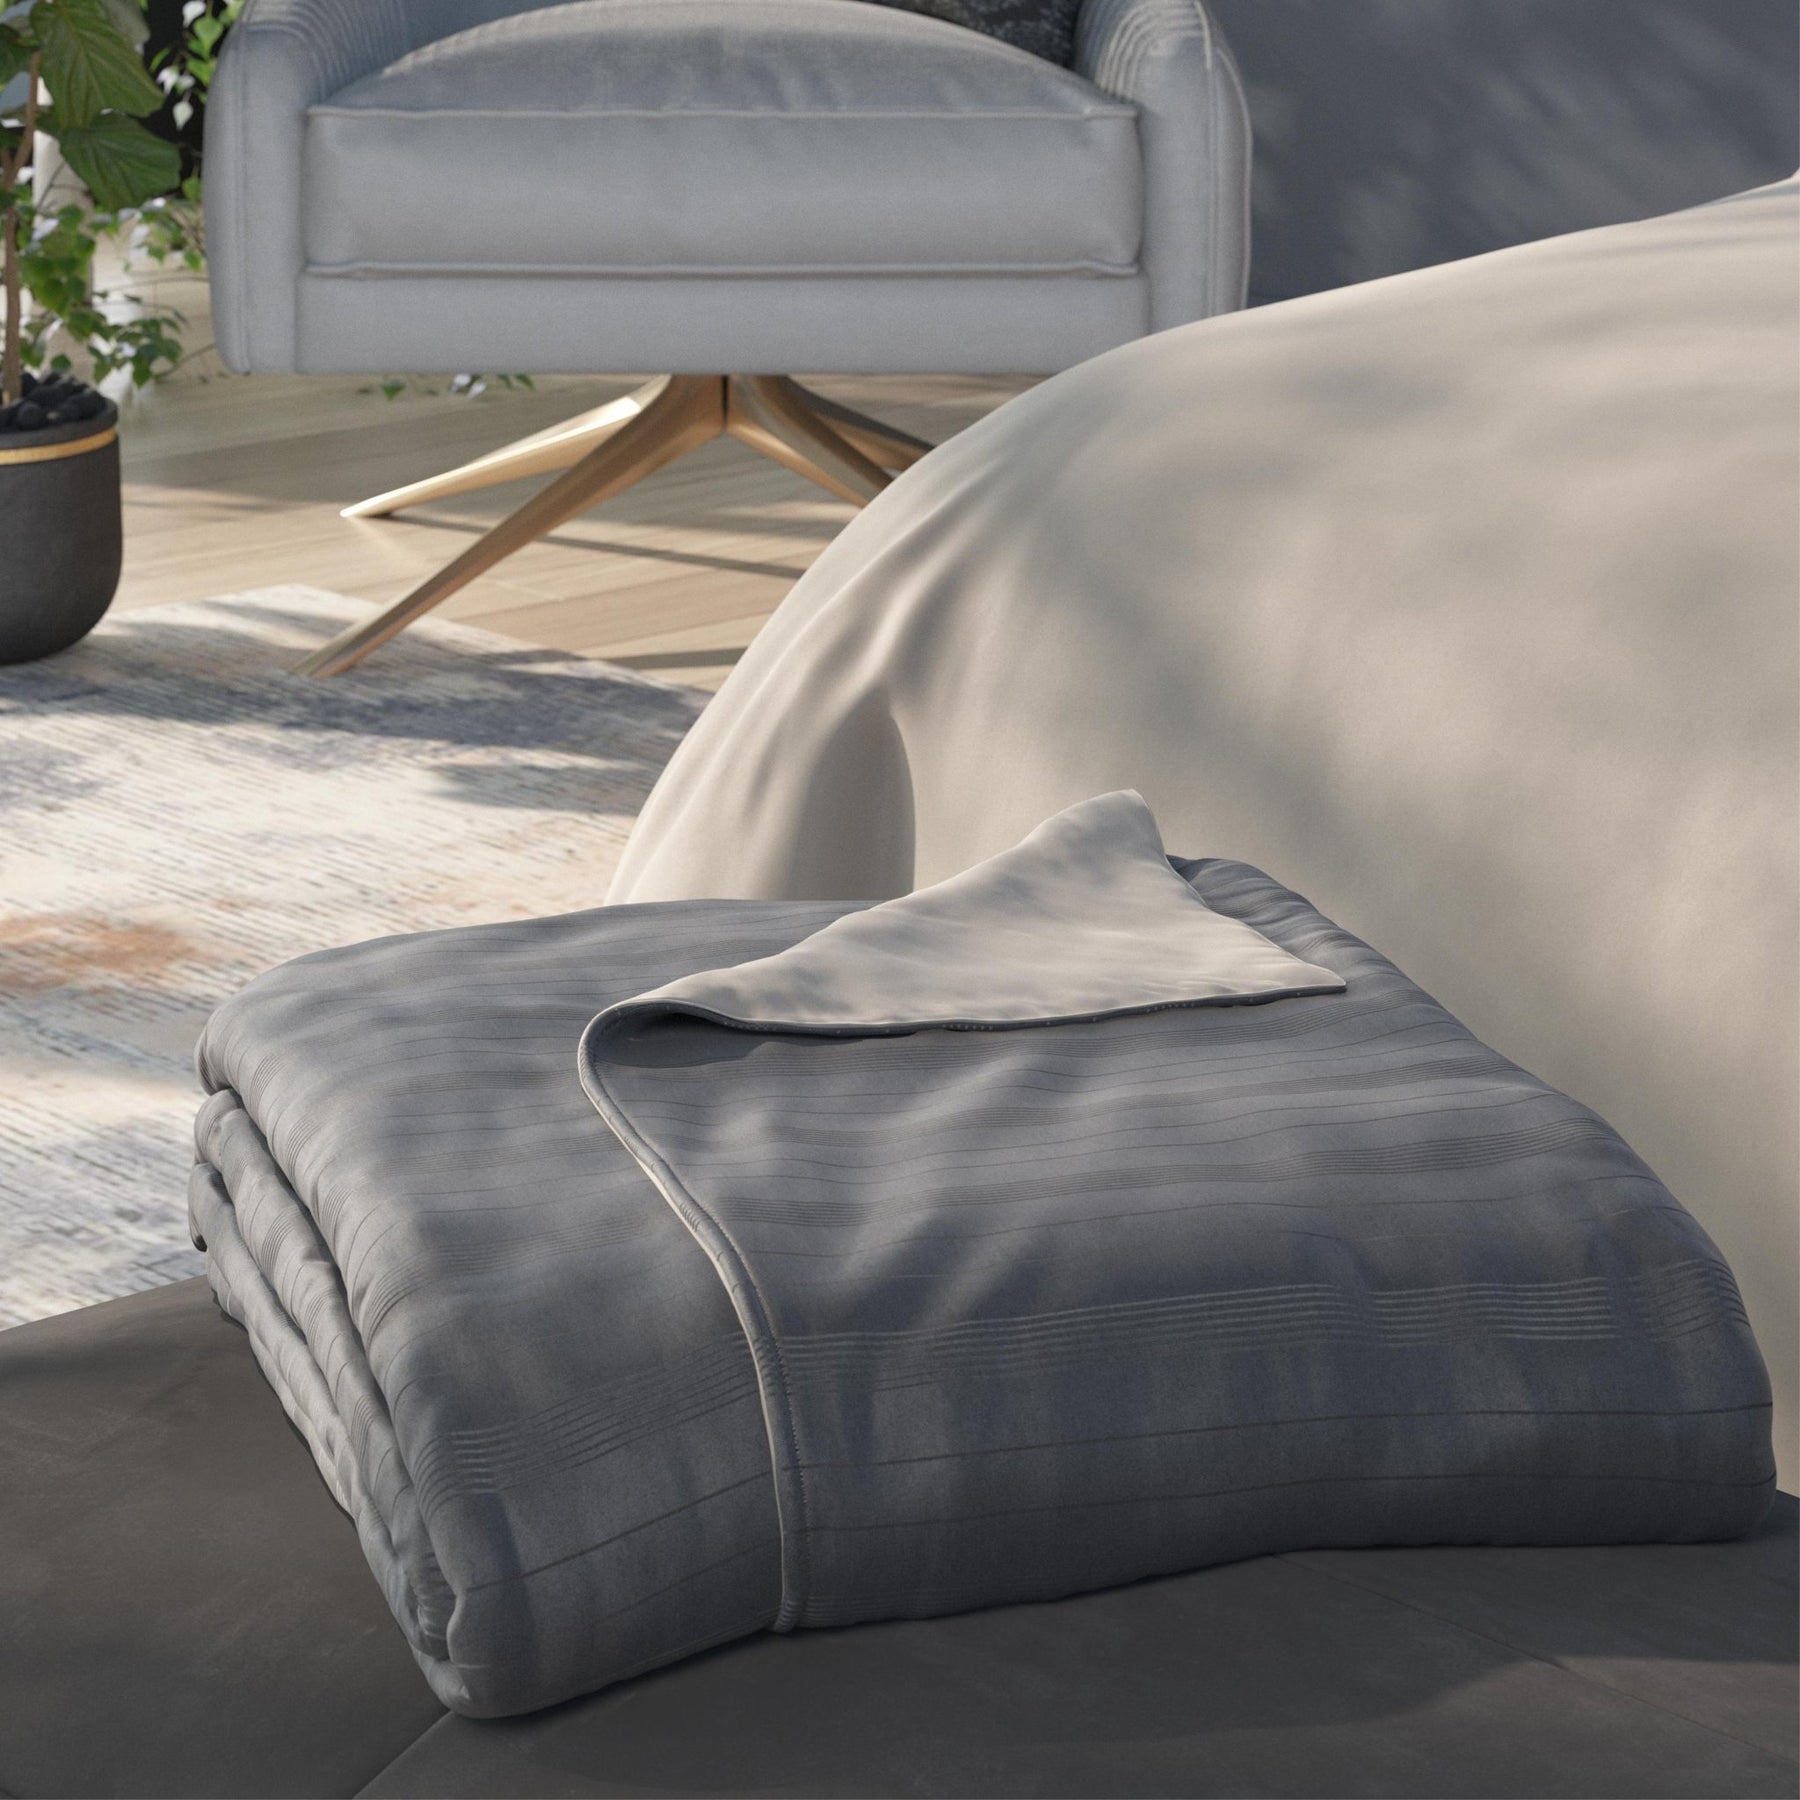 Duvet Cover + Soft Touch/Bamboo